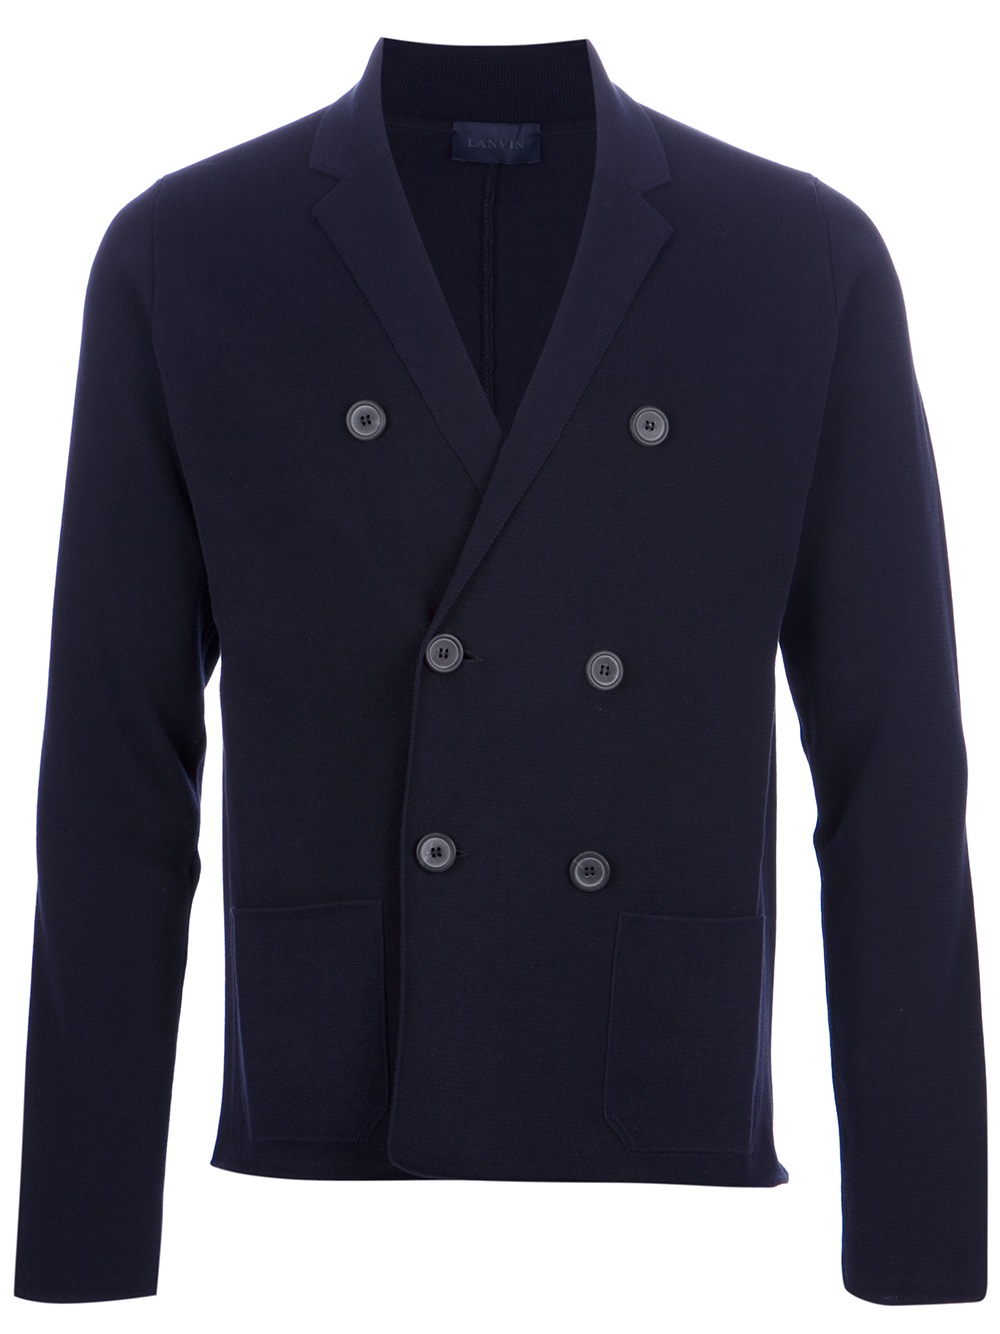 Lyst - Lanvin Double Breasted Cardigan in Blue for Men